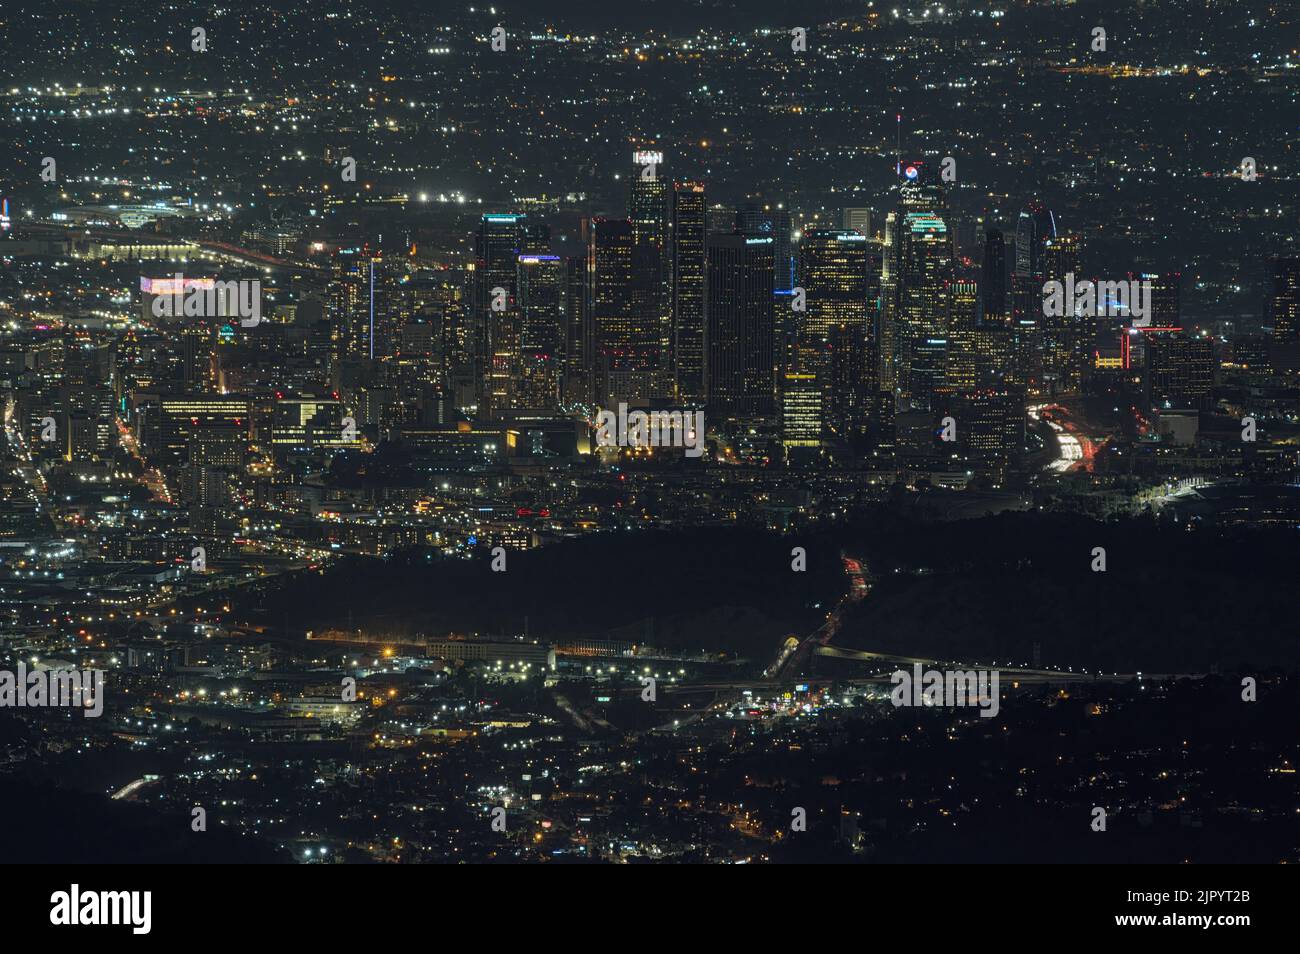 Mont Wilson Observatory, California, USA - August 10, 2022: image of downtown Los Angeles shown at night. Stock Photo